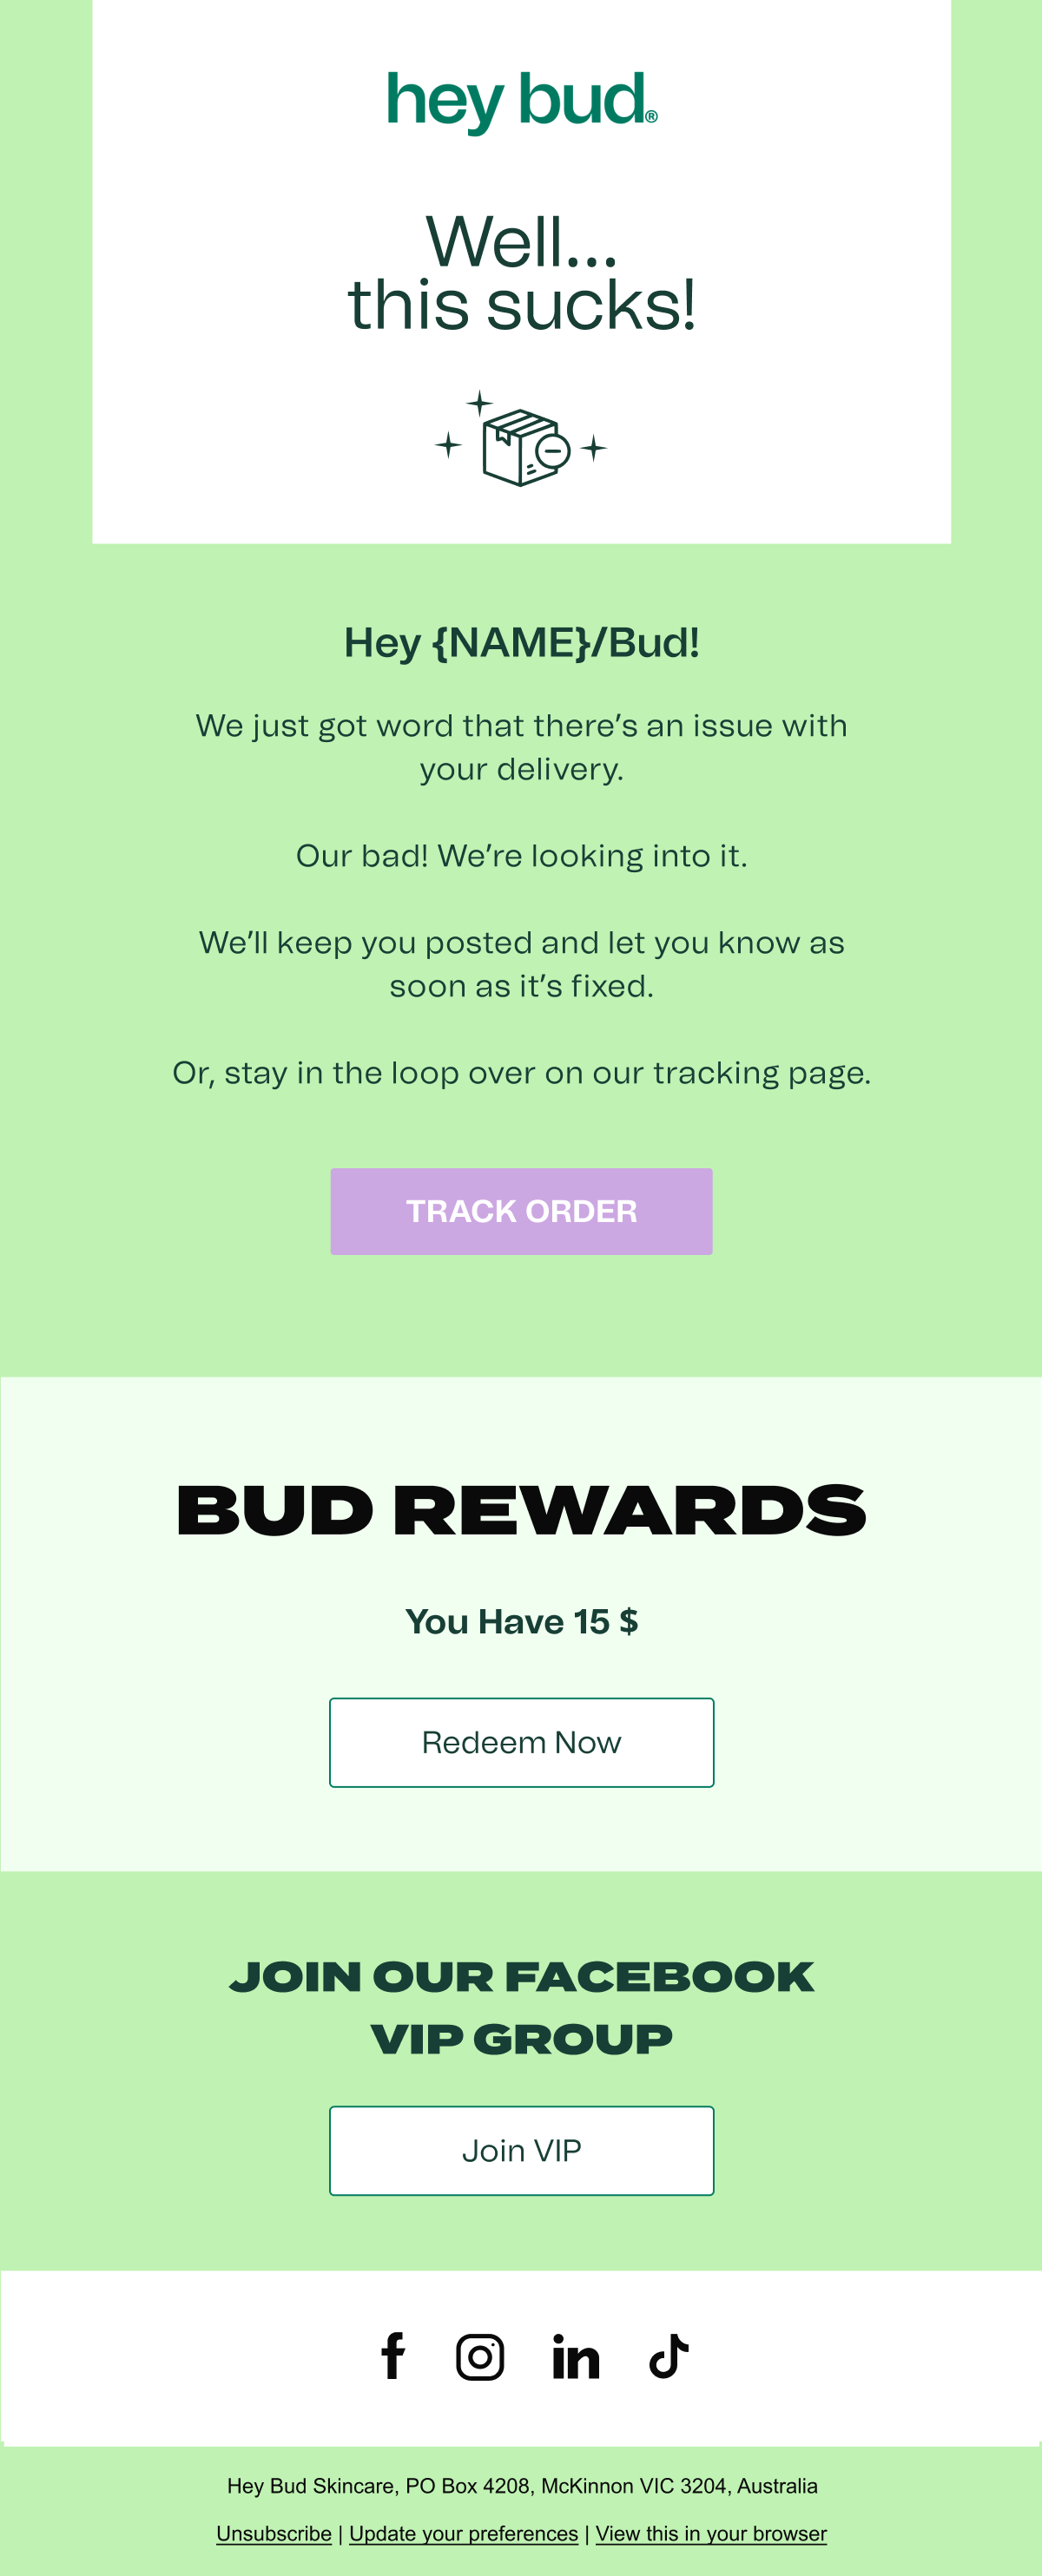 Hey Bud Other Delivery Issues Industry Email Template screenshot